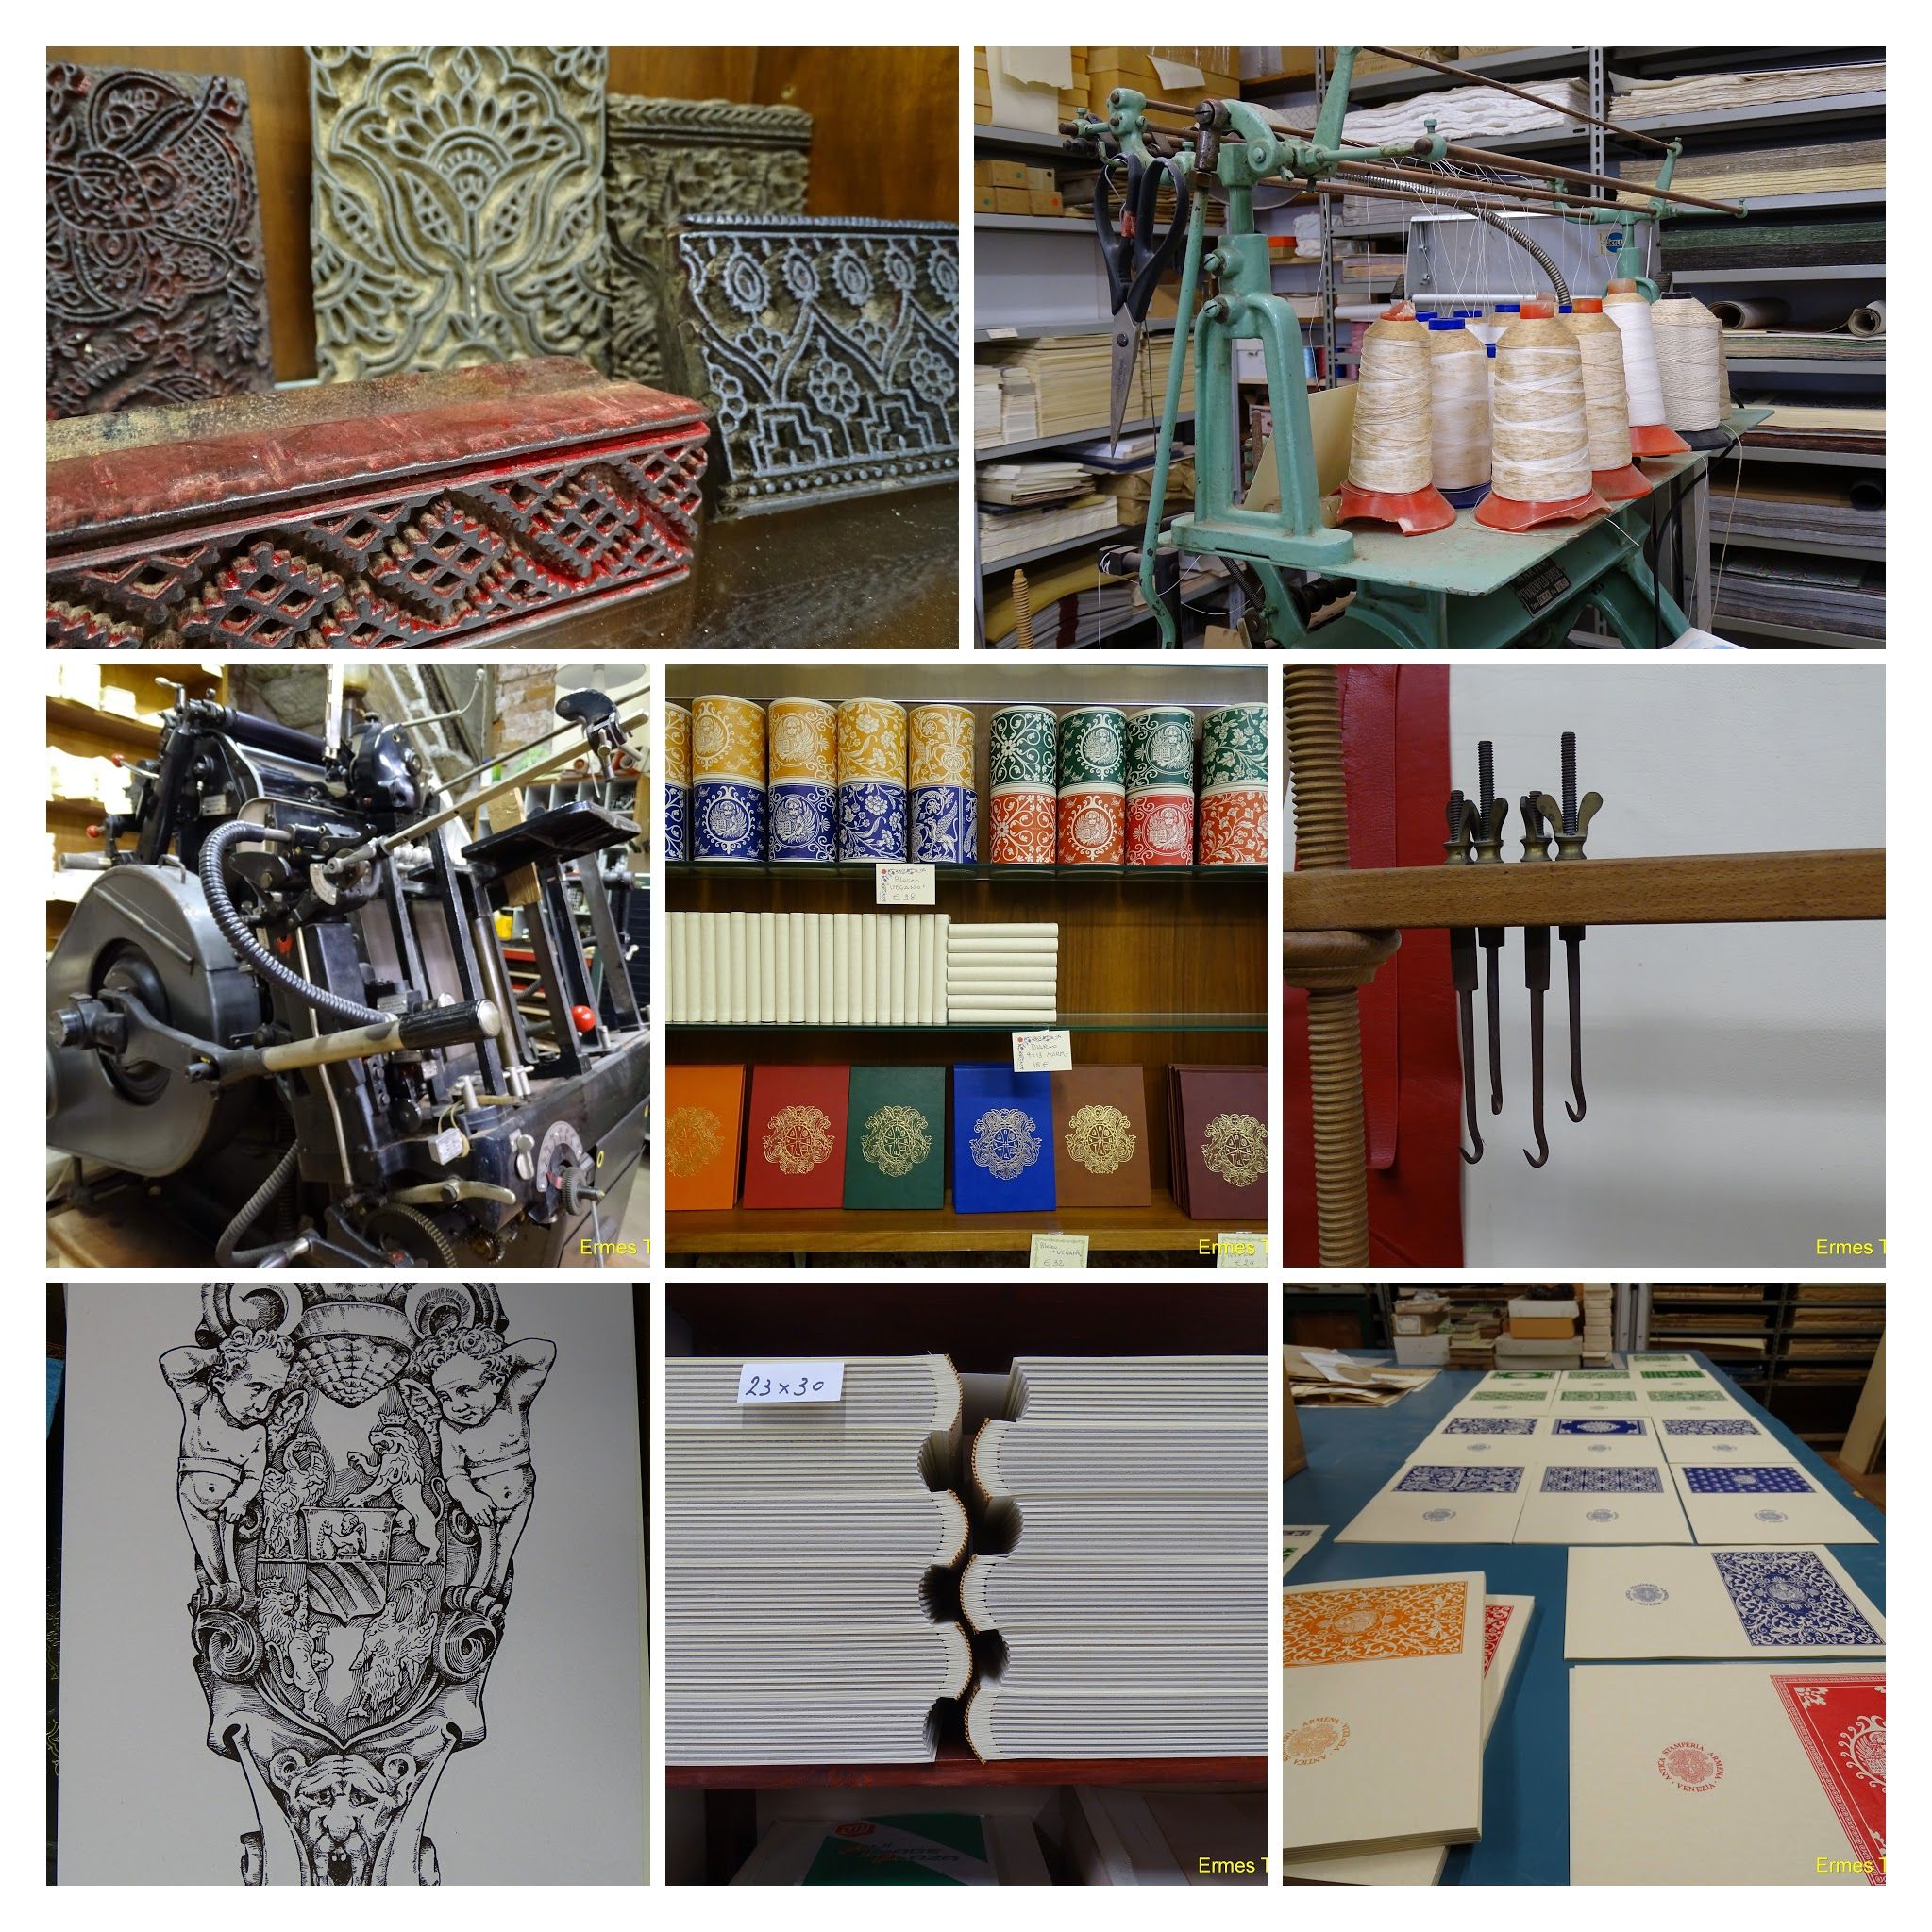 Caption: details of the printing shop - @Local Guide @ermest